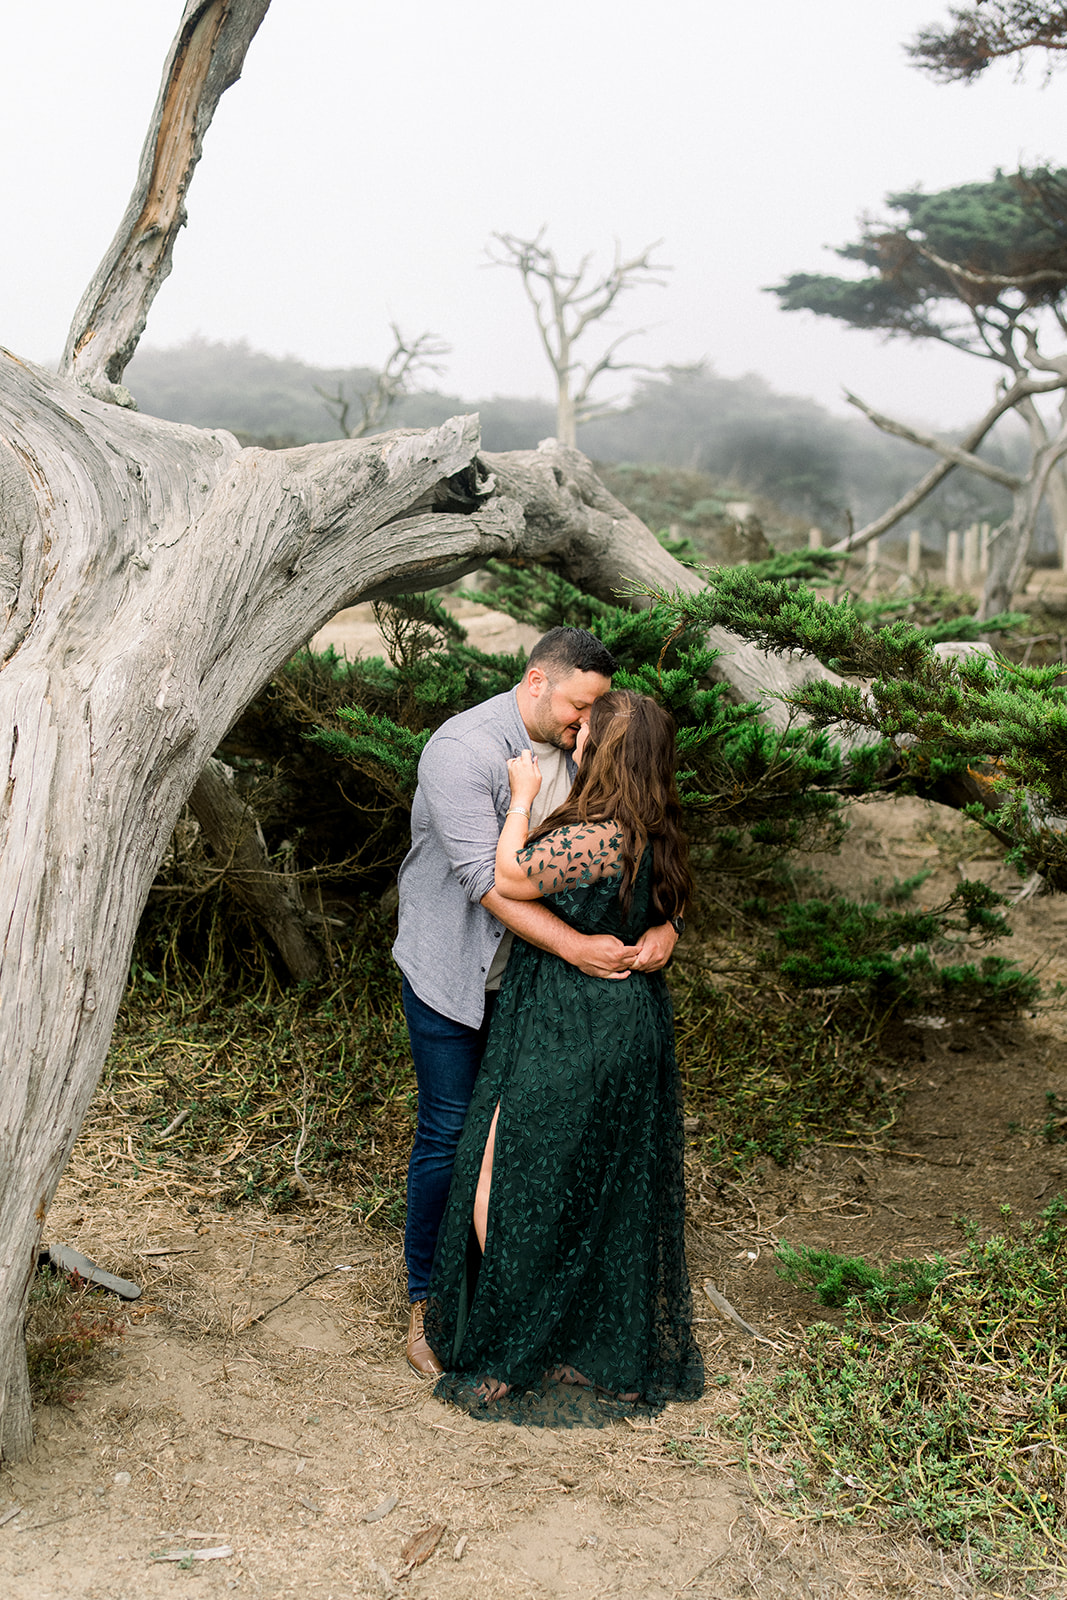 Bride and groom embrace next to a cypress tree during their engagement portraits at Lands Ends San Francisco